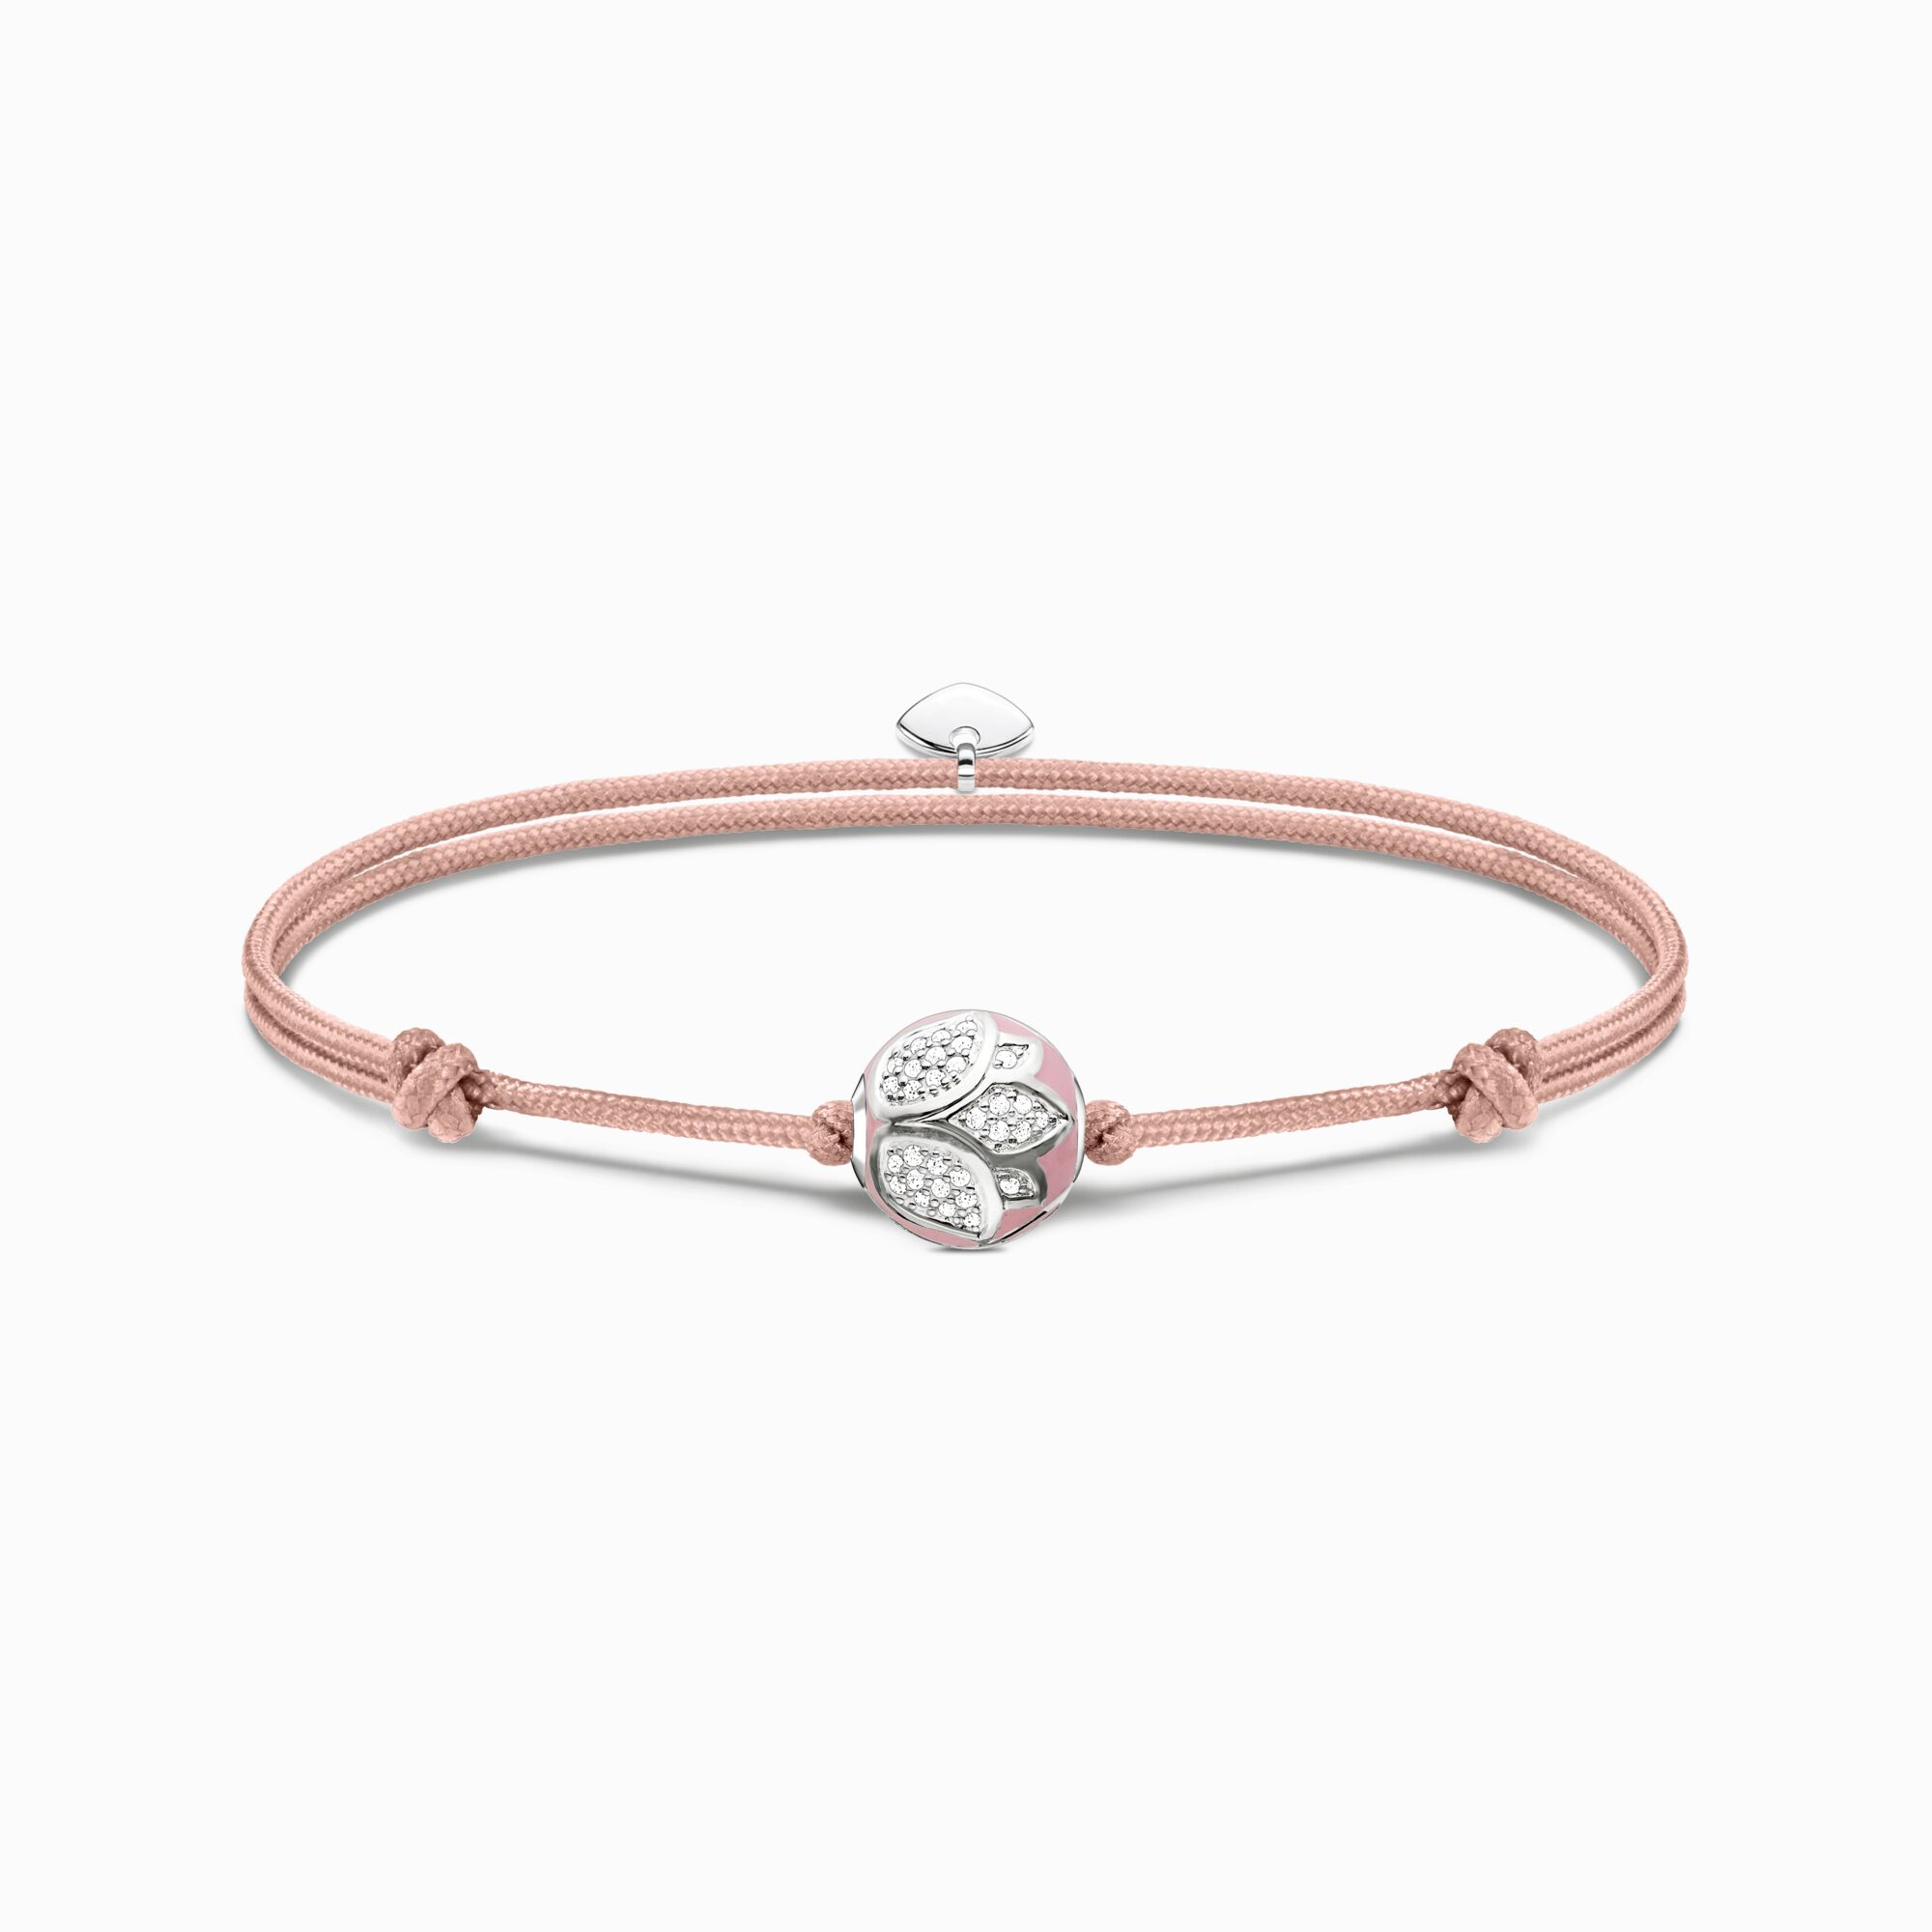 Bracelet Karma Secret with pink lotus blossom Bead from the Karma Beads collection in the THOMAS SABO online store